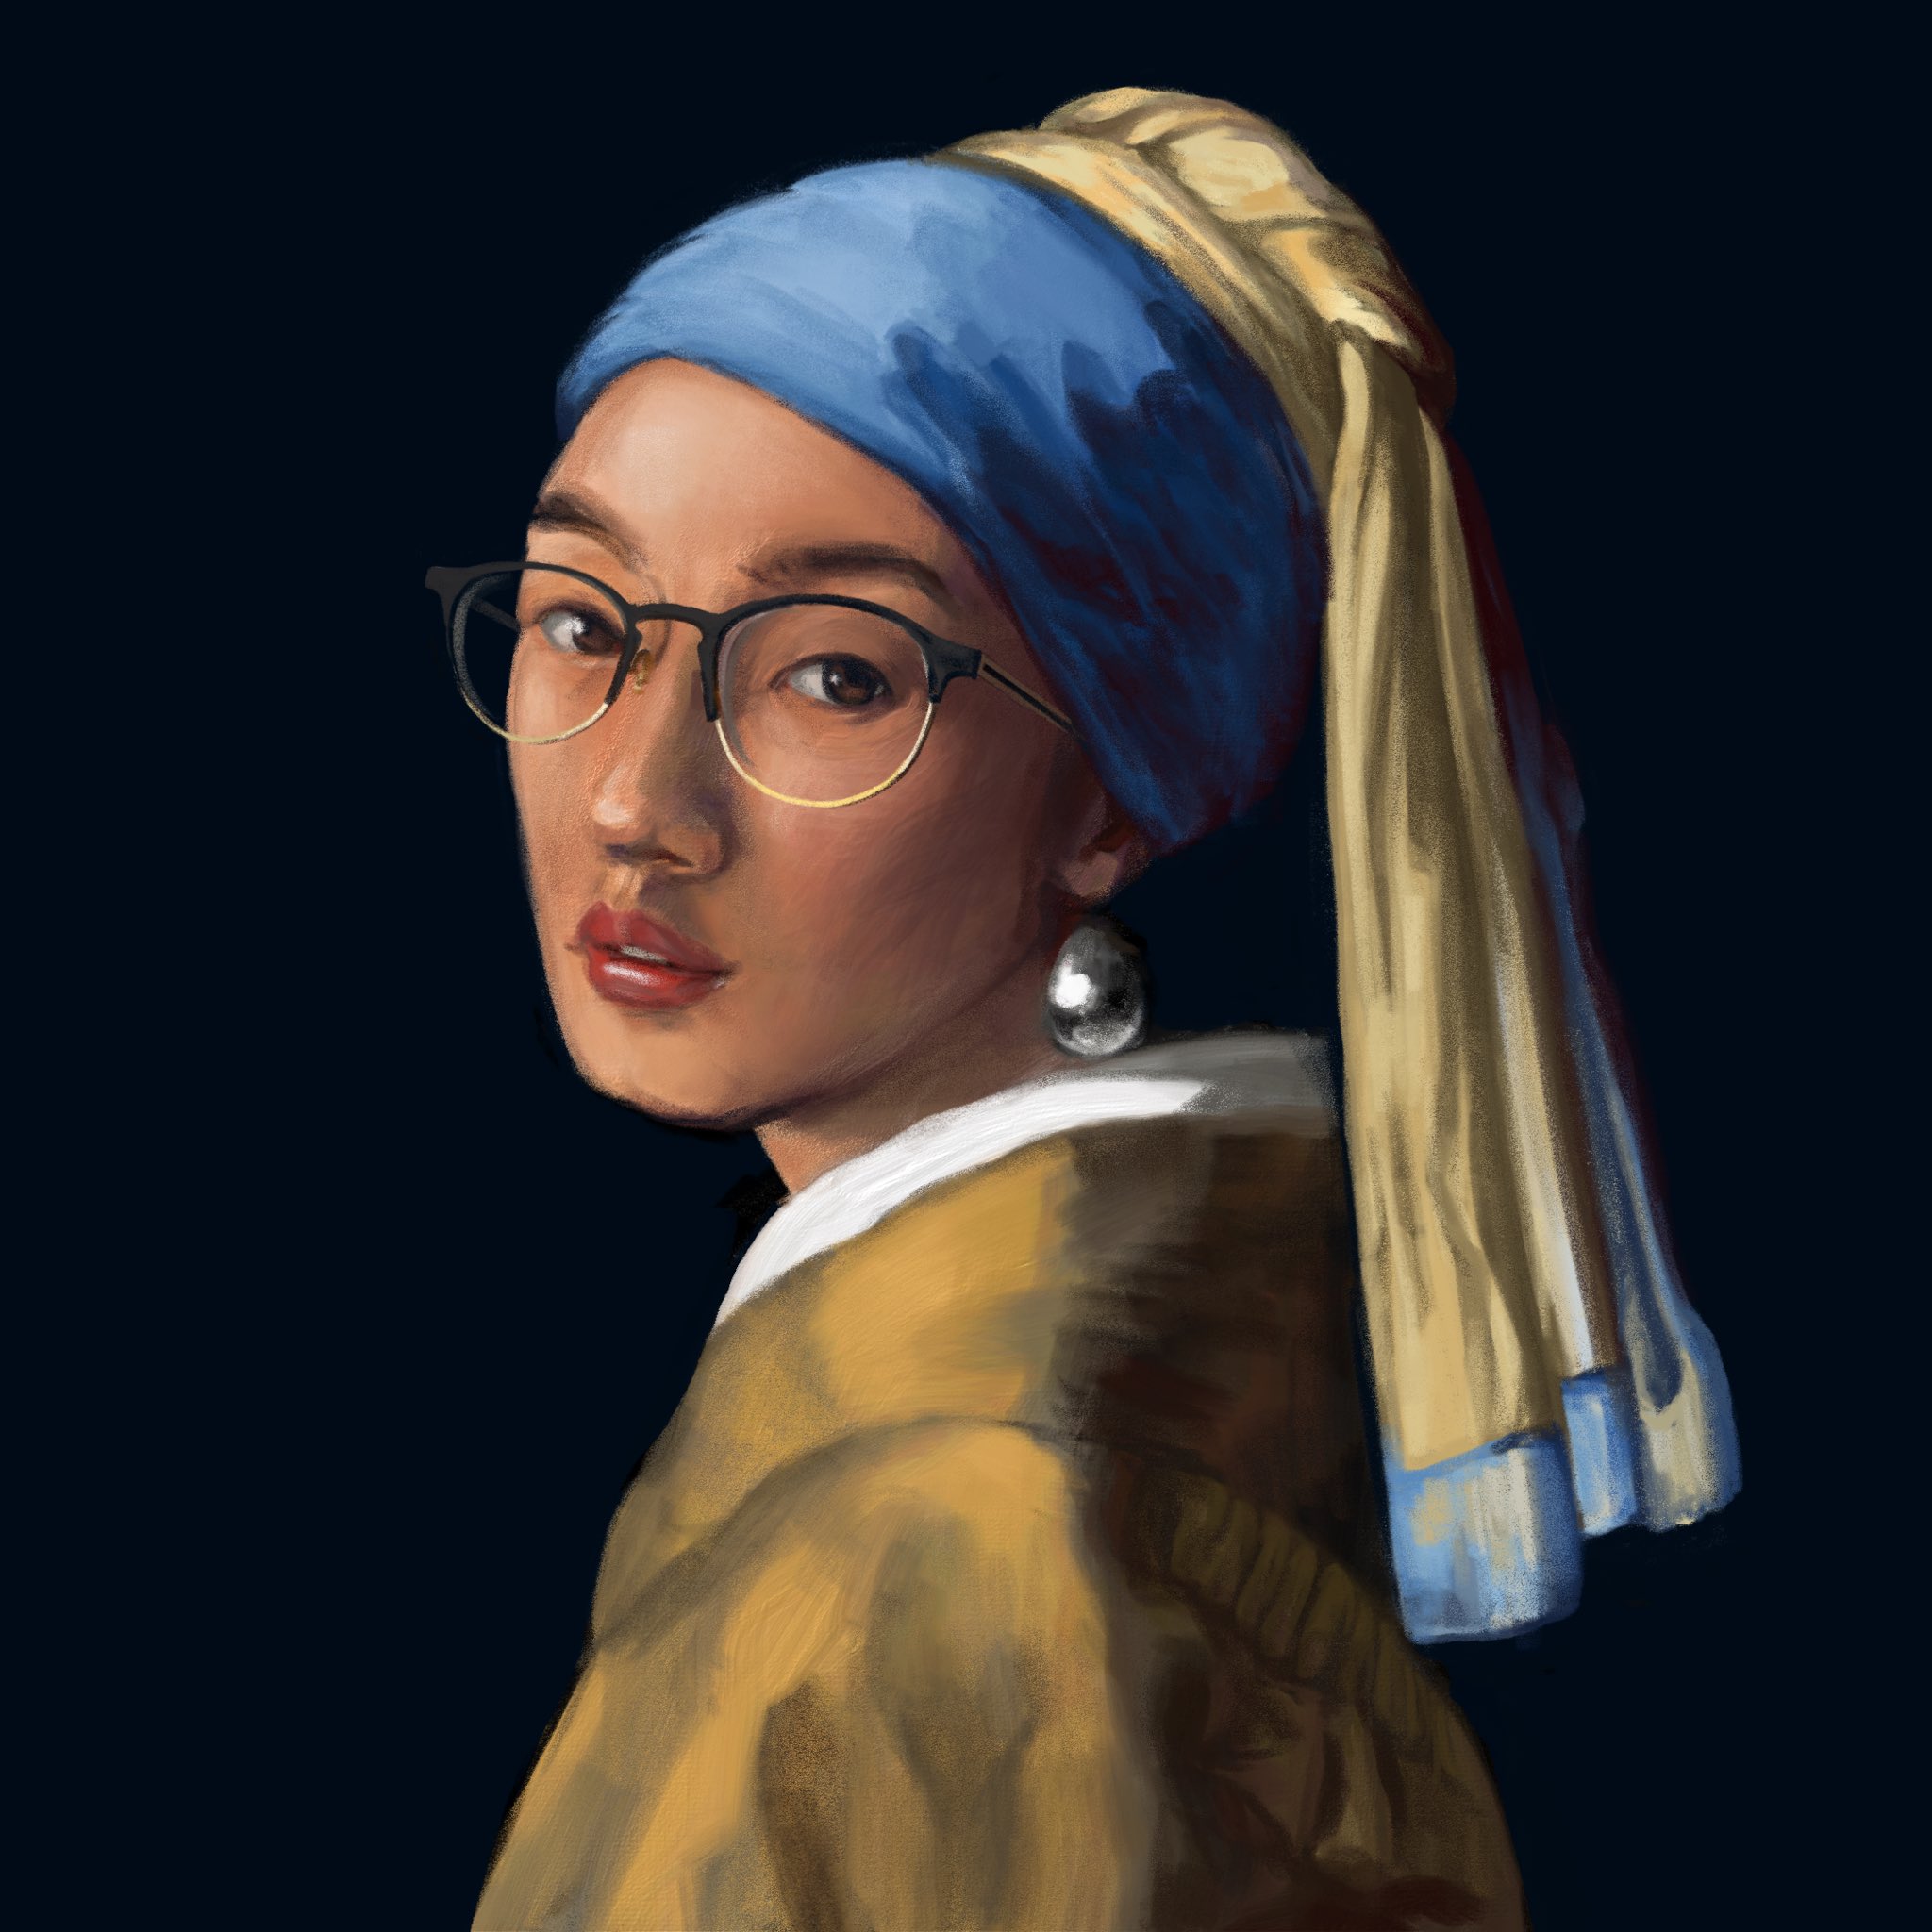 My copy of Girl with a Pearl Earring by Johannes Vermeer